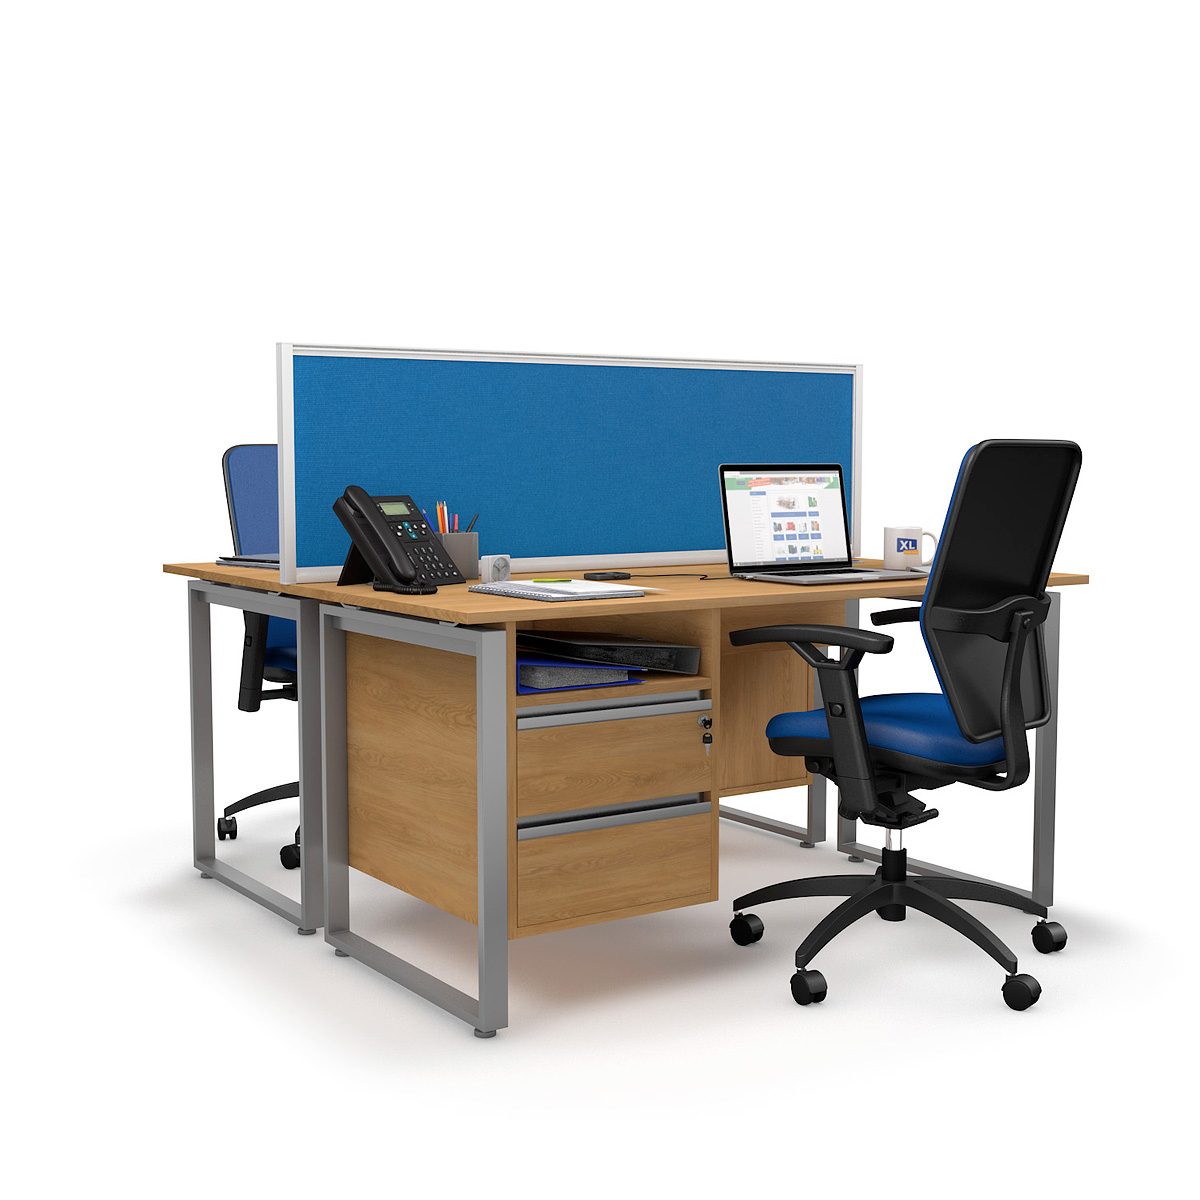 FRONTIER® Office Screen Desk Dividers Create Private Workstations To Boost Employee Productivity 